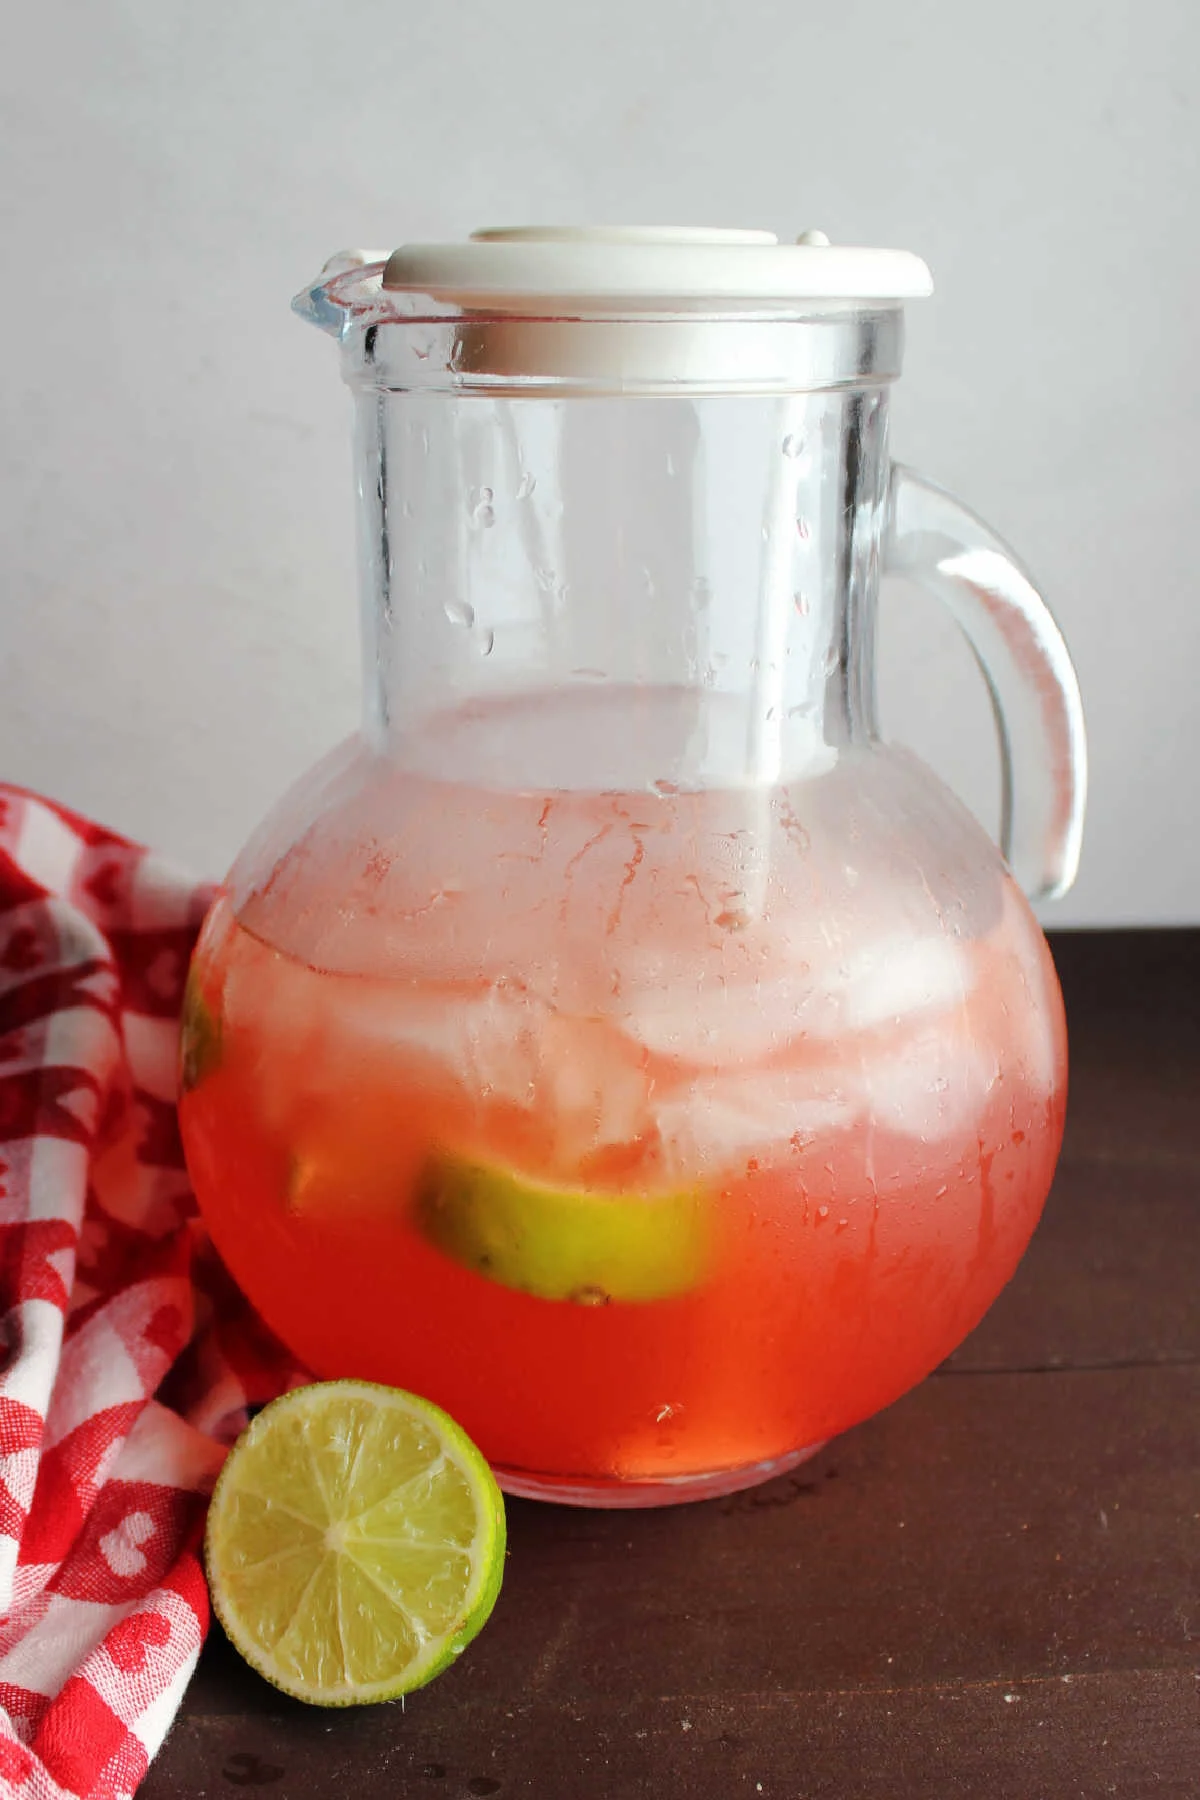 Half gallon pitcher of fresh squeezed cherry limeade.